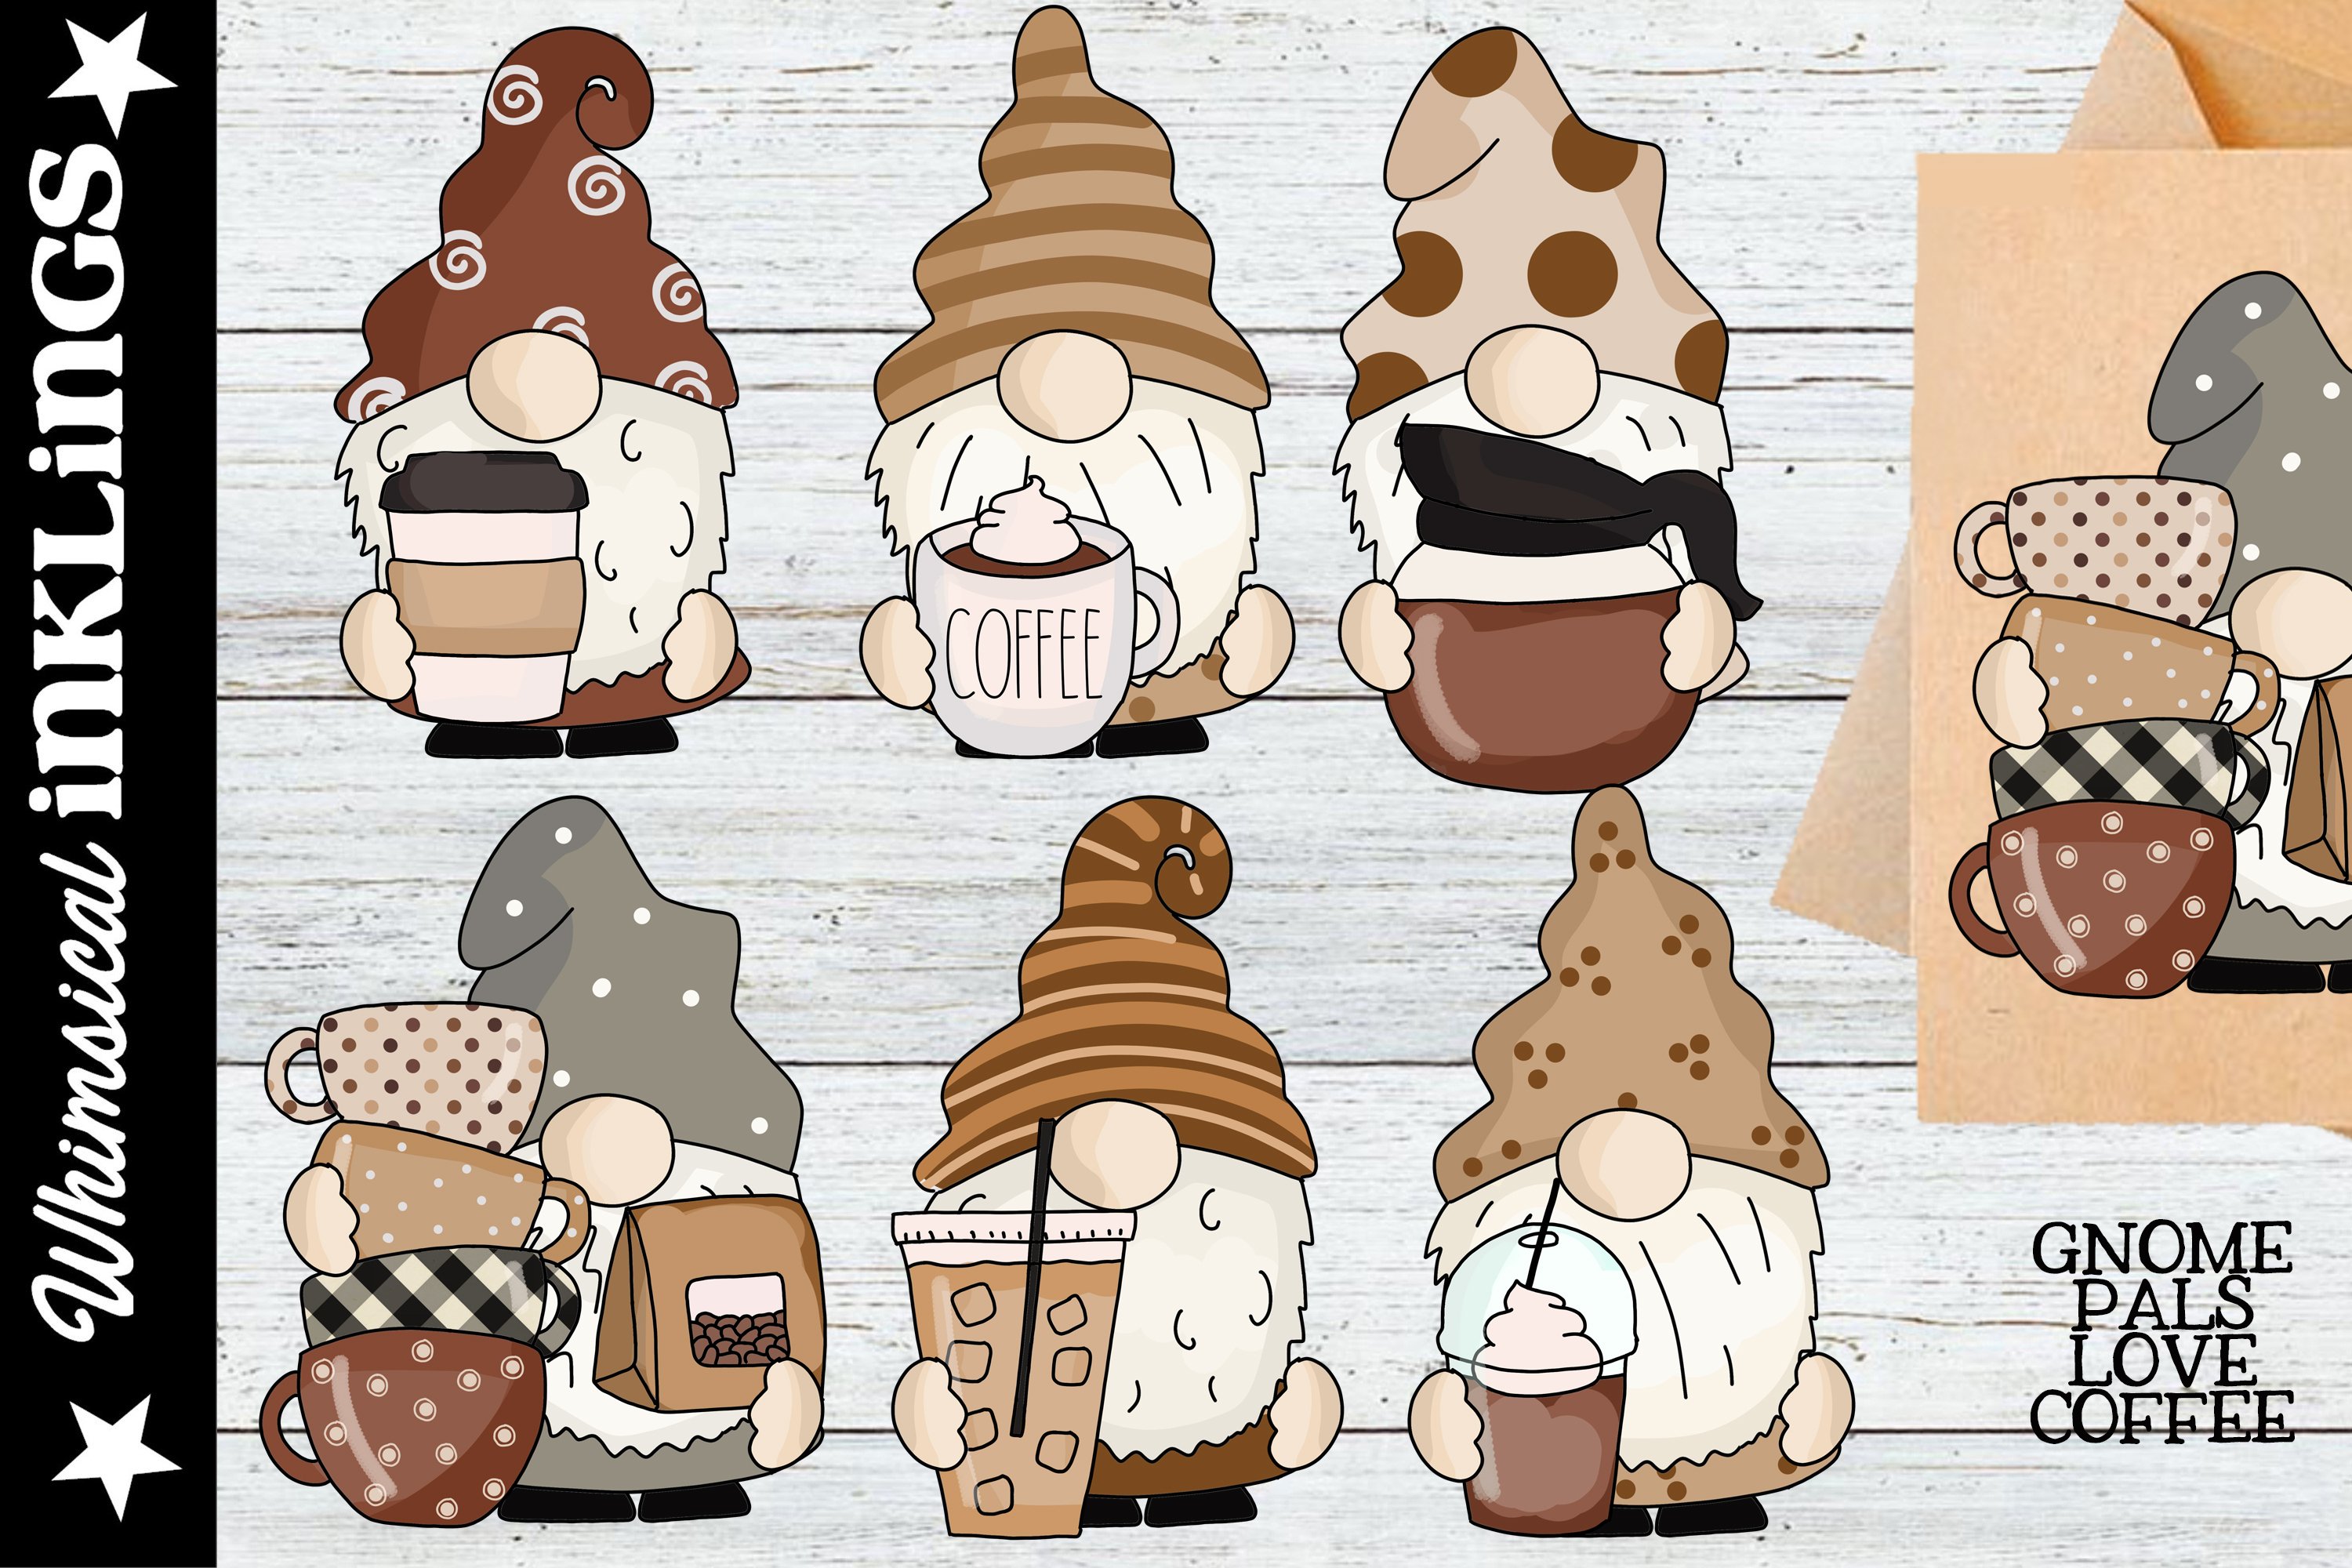 Gnome pals - coffee lovers.